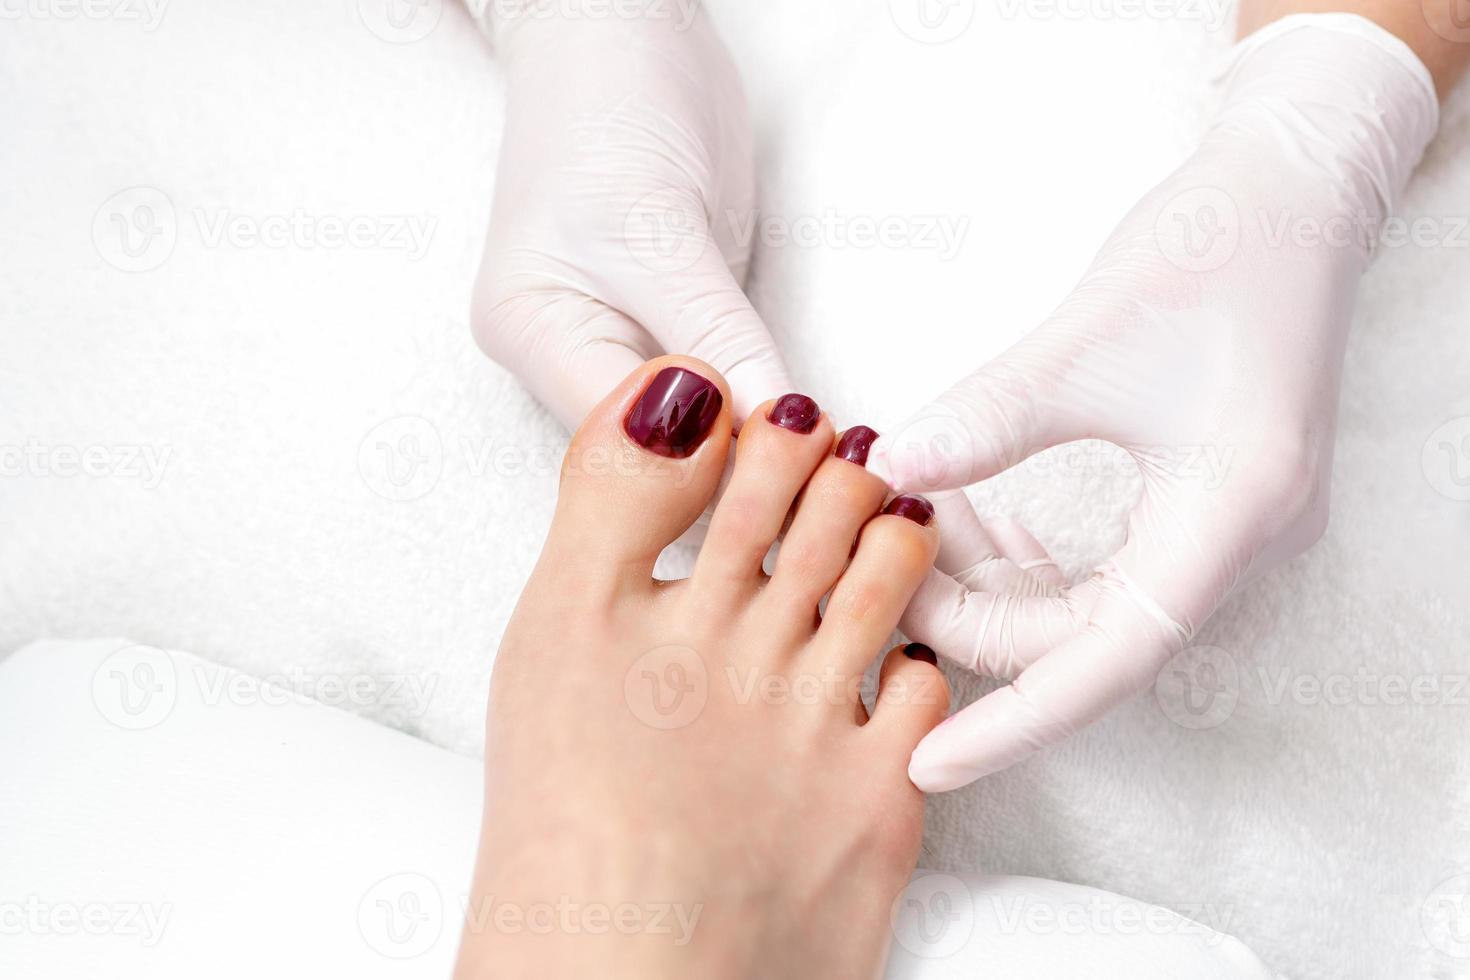 human hands holding painted toenails photo